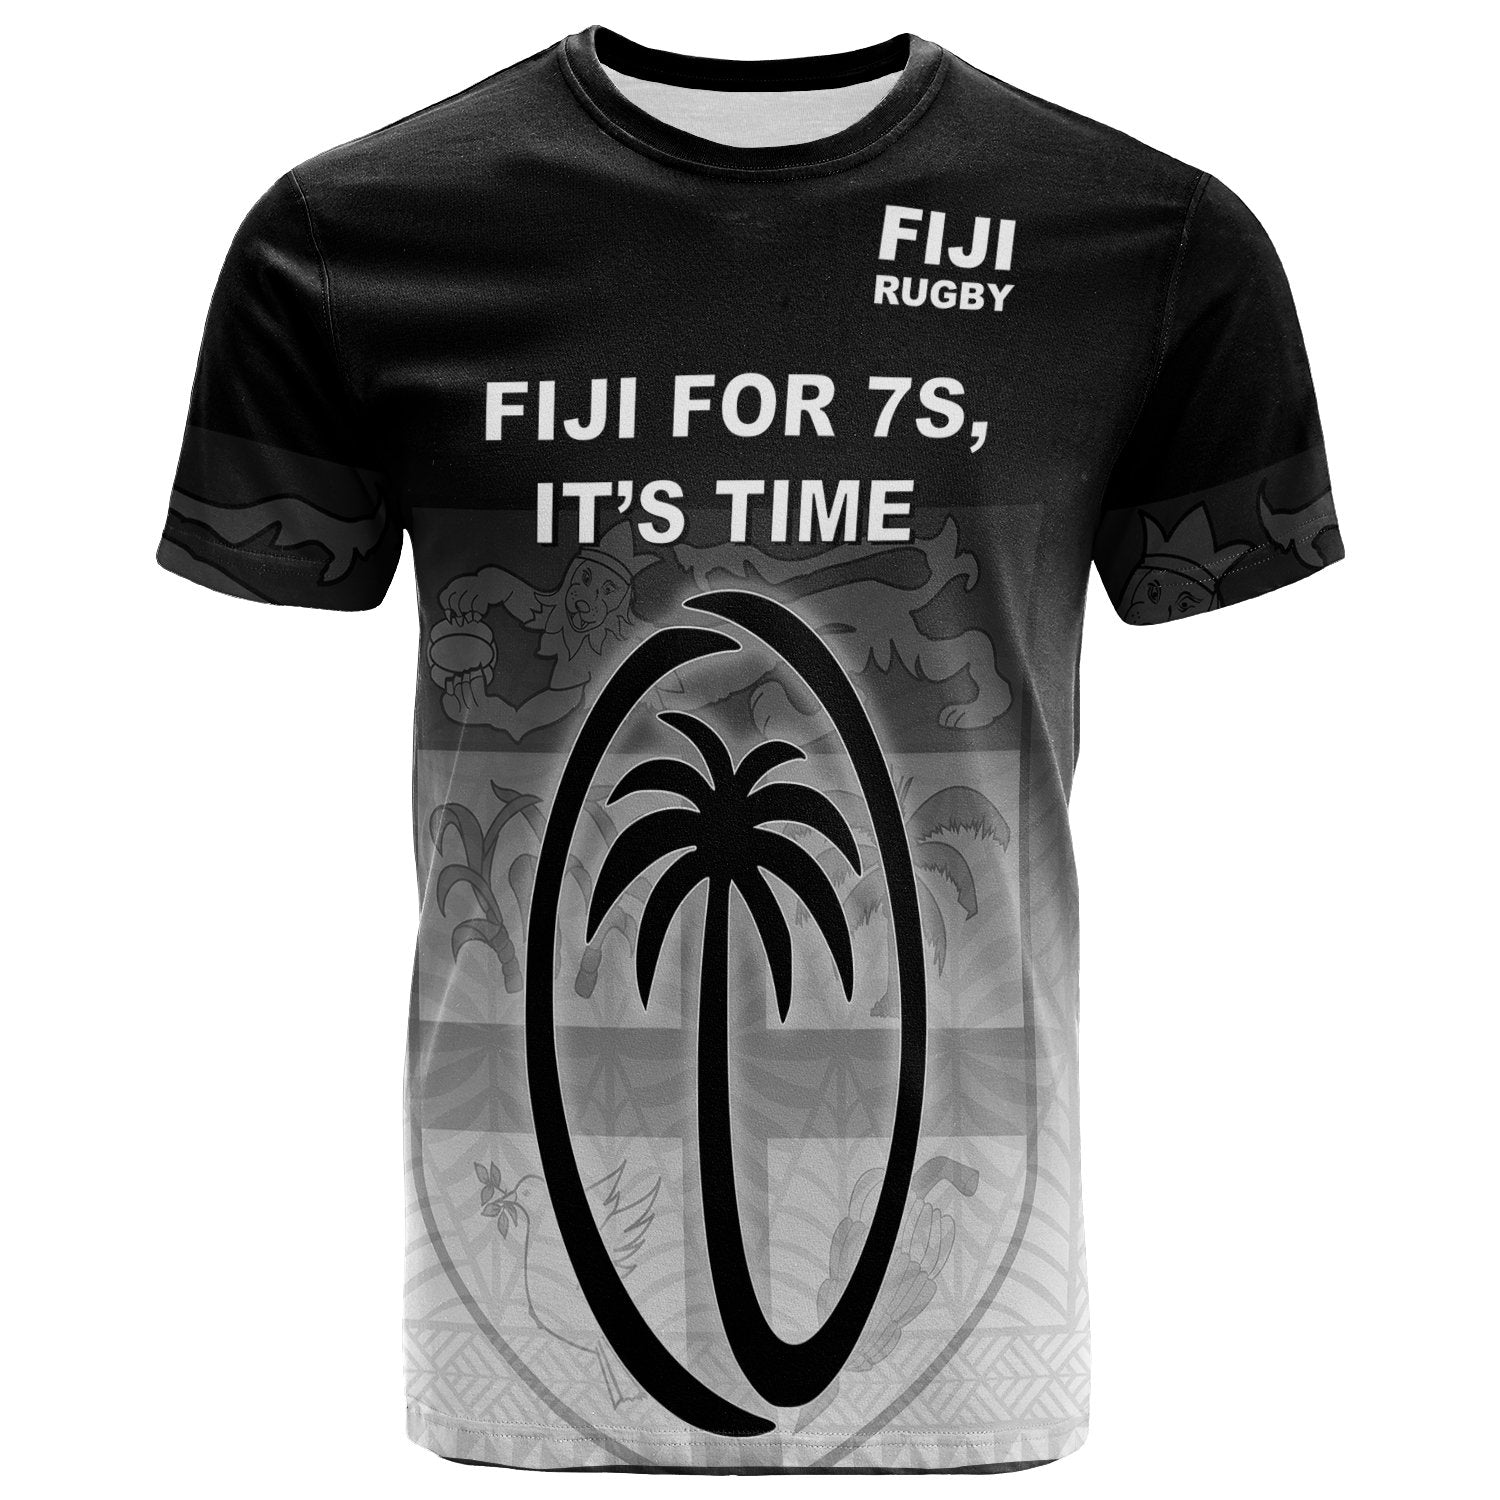 Fiji Rugby T Shirt Fiji For 7s, Its Time LT20 Unisex Blue - Polynesian Pride